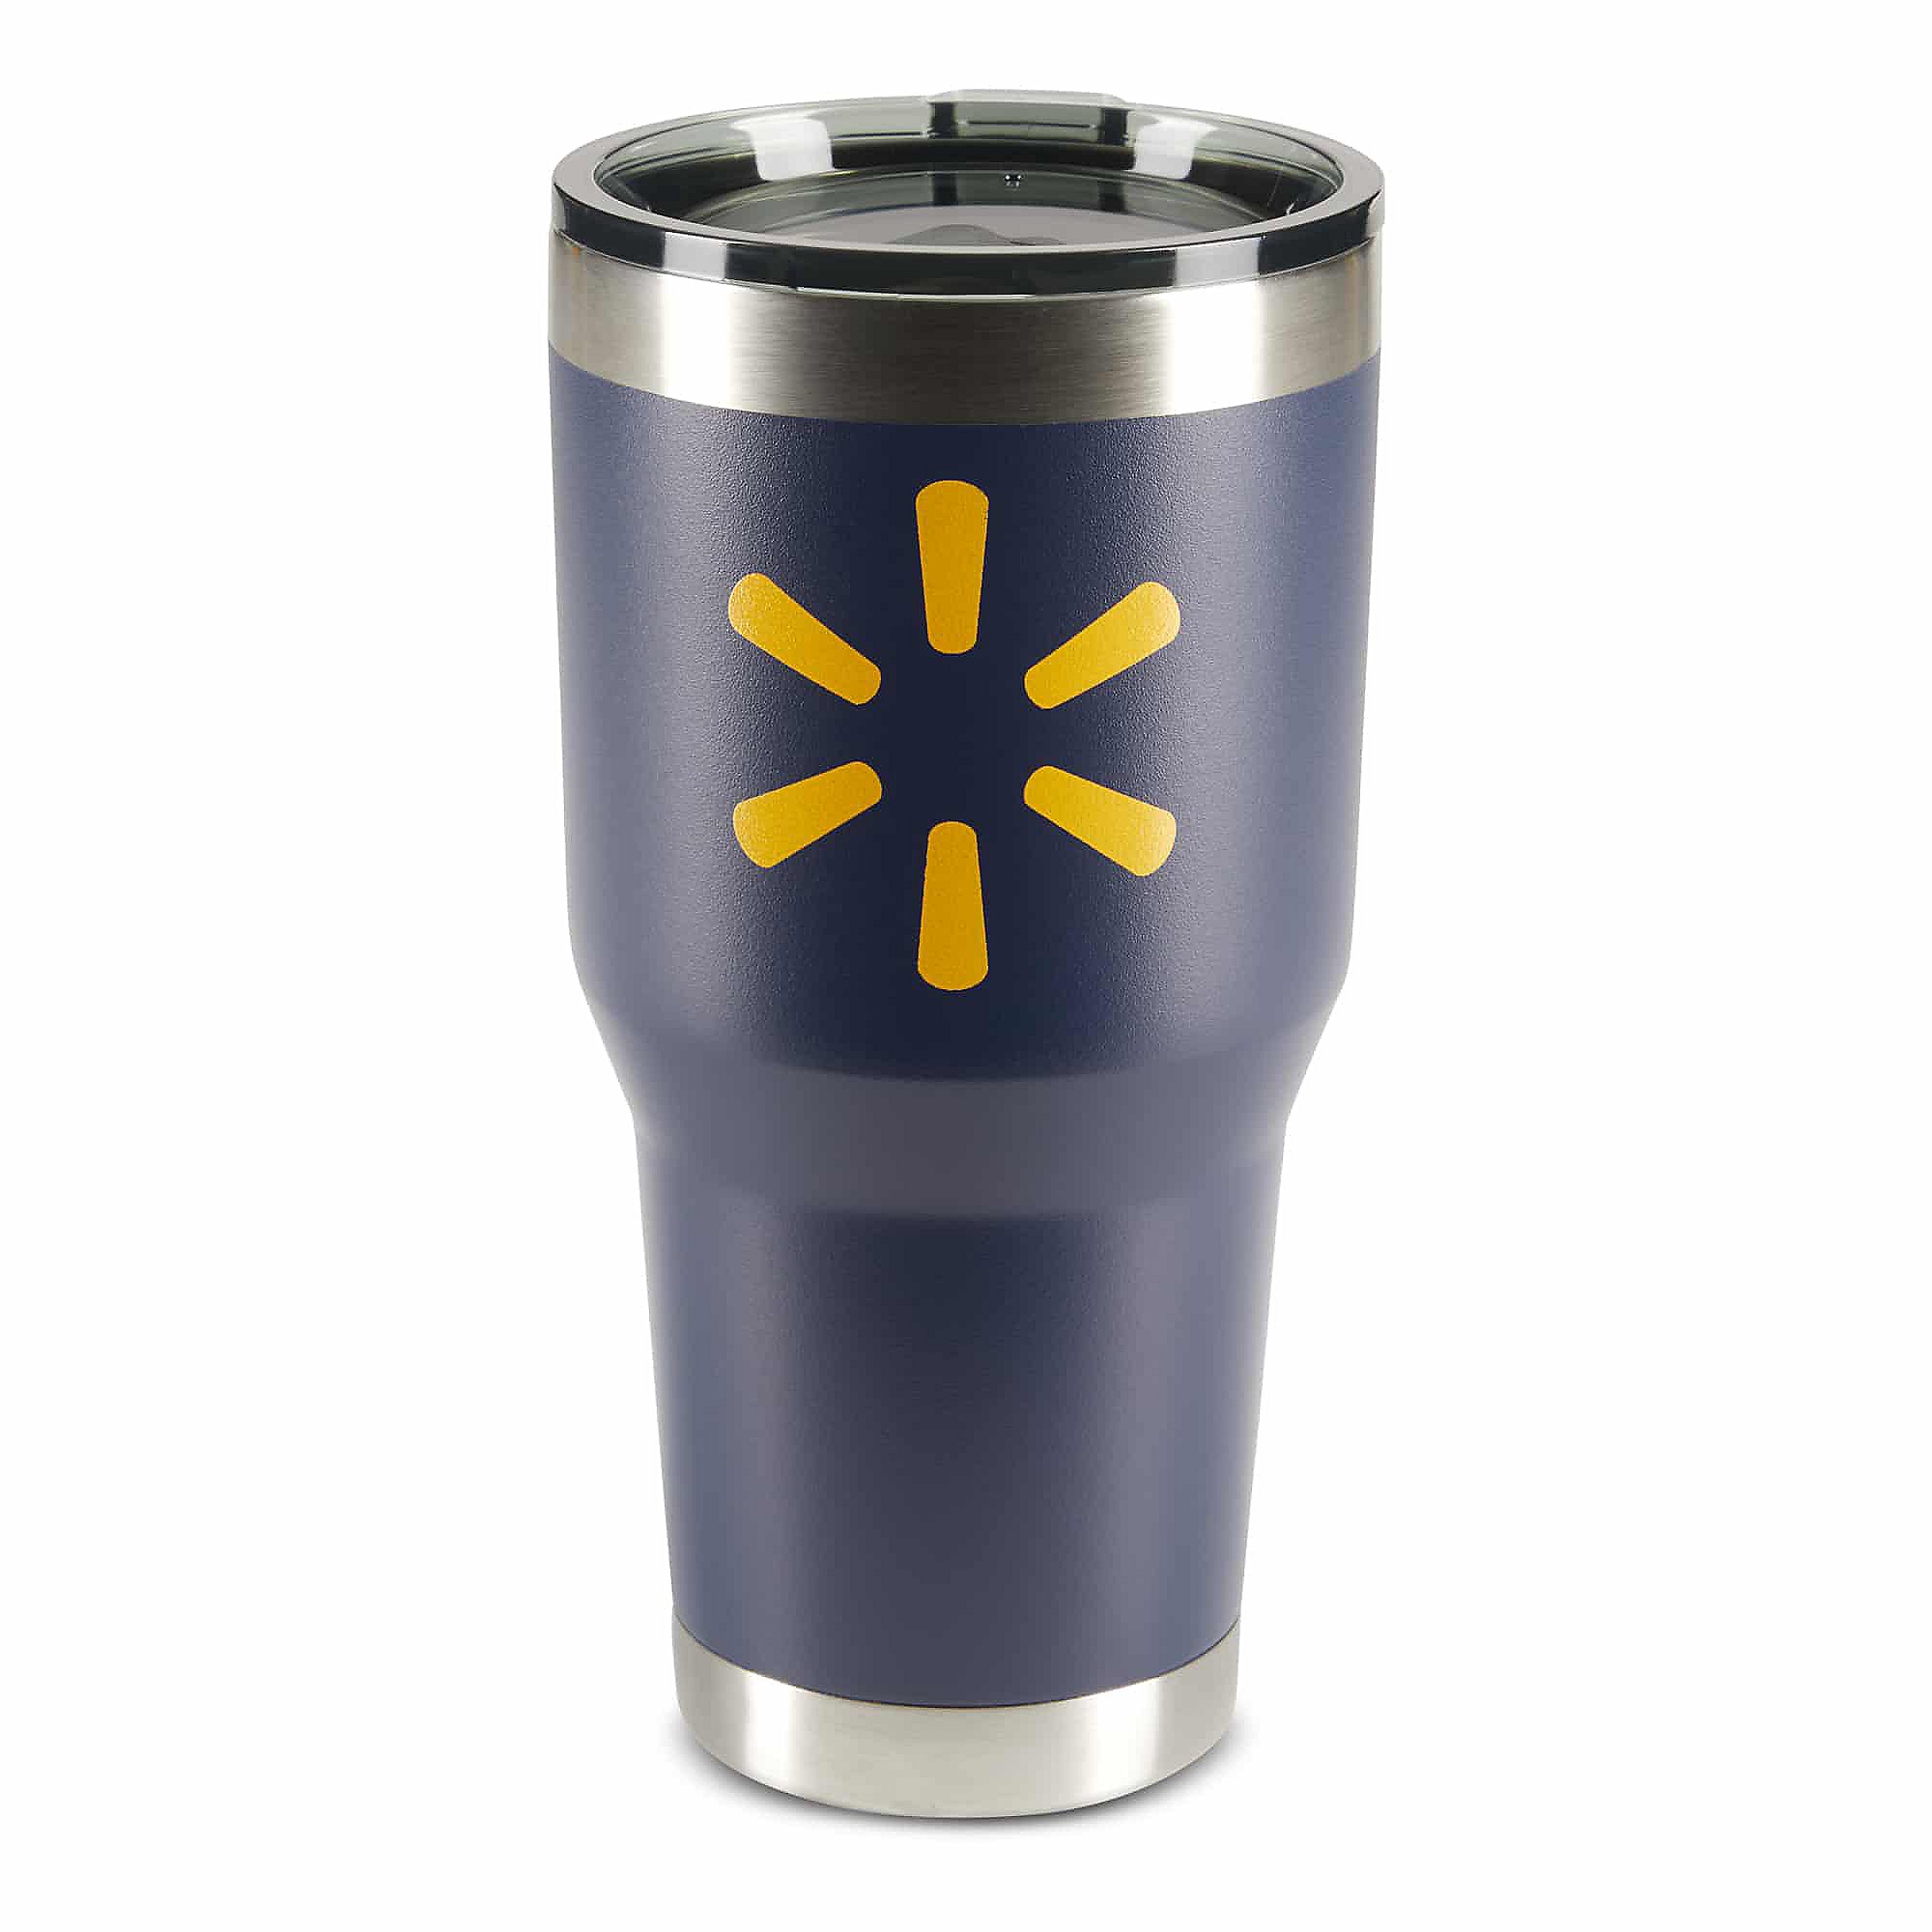 SparkShop Stainless Steel Tumbler with Spark \- 30 oz